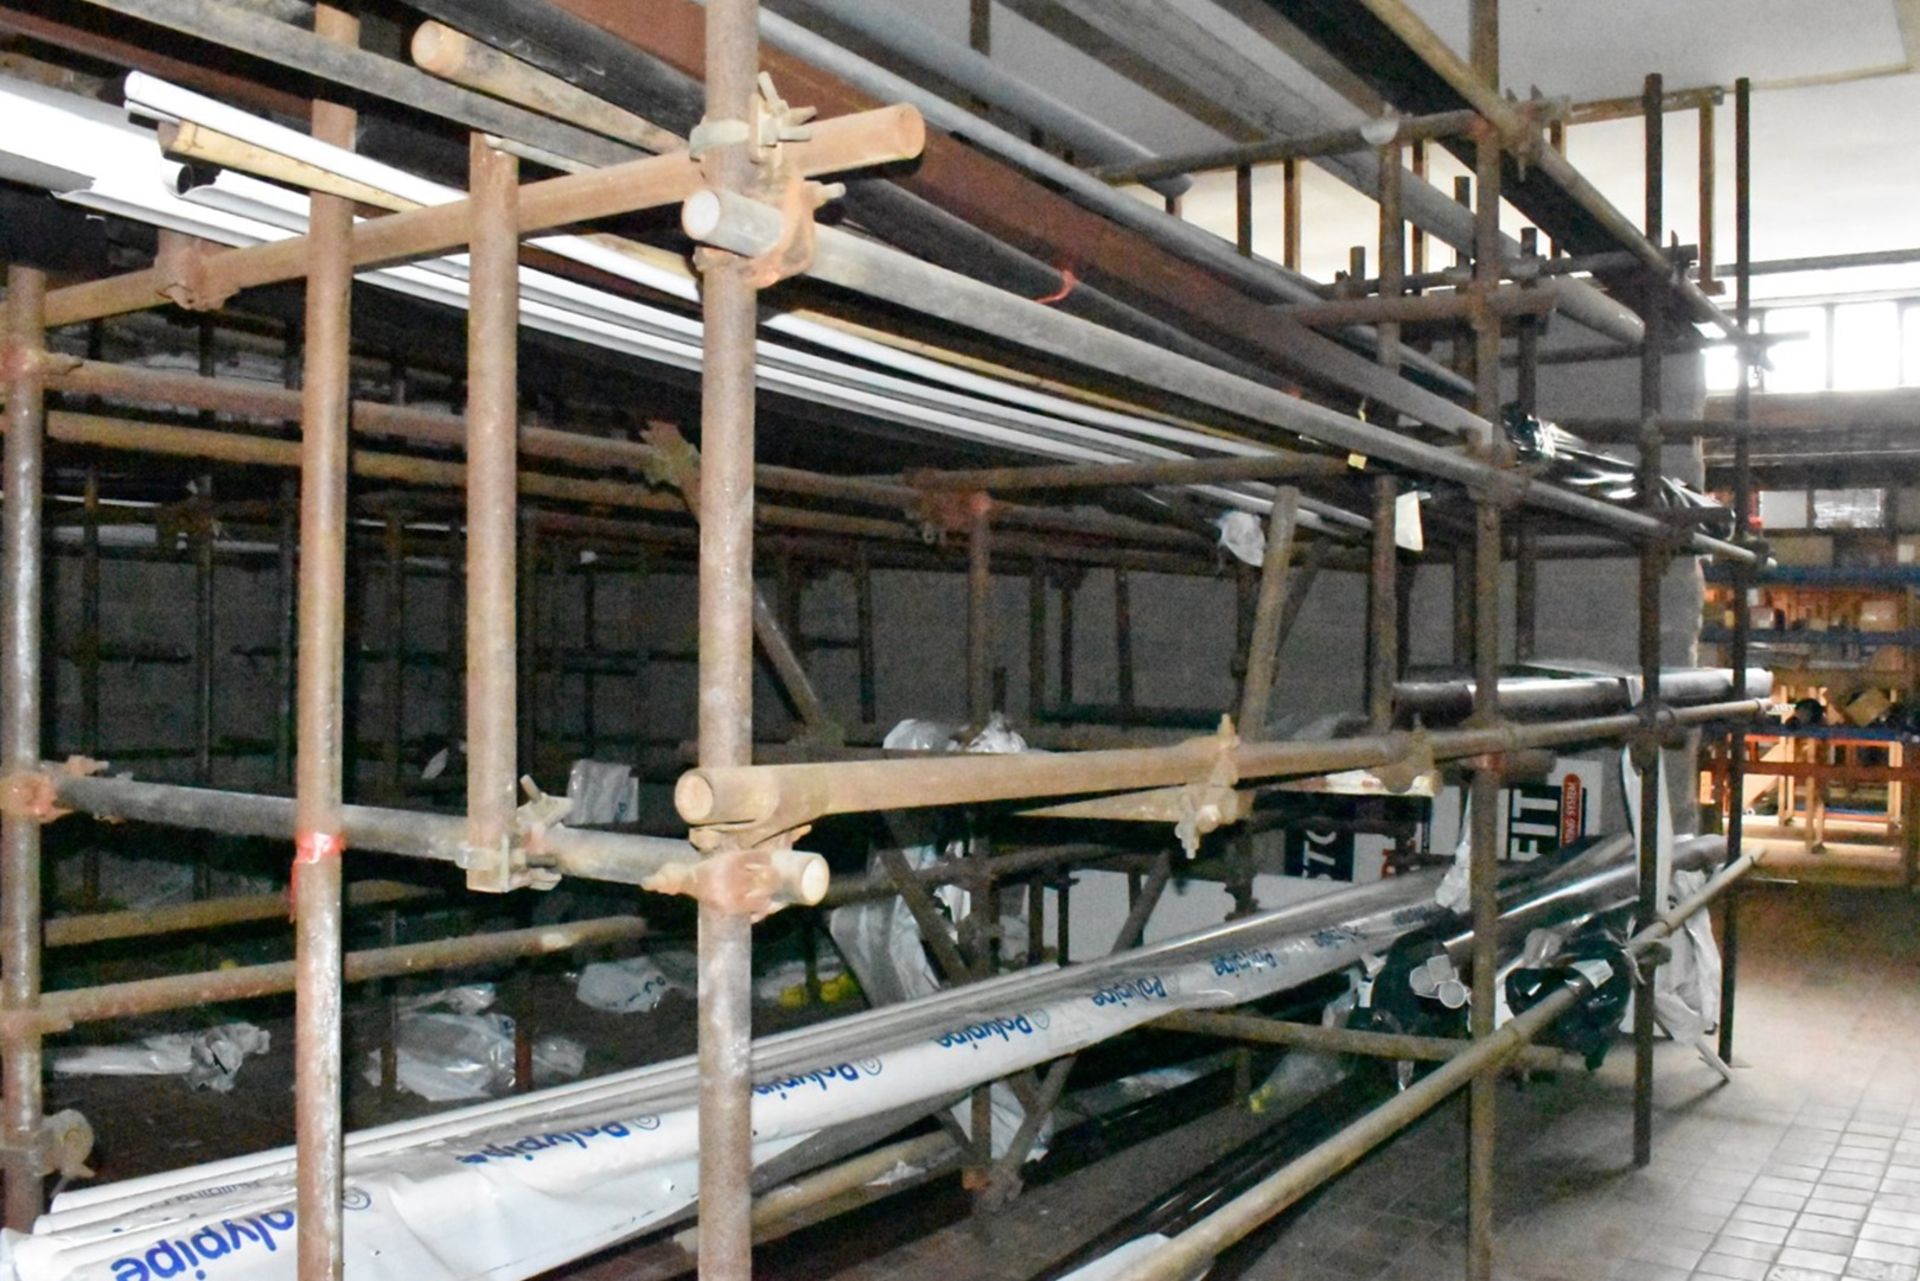 1 x Large Collection of Scaffolding and Fixtures Covering a Floor Space of Approx 13 x 13ft - Image 9 of 15